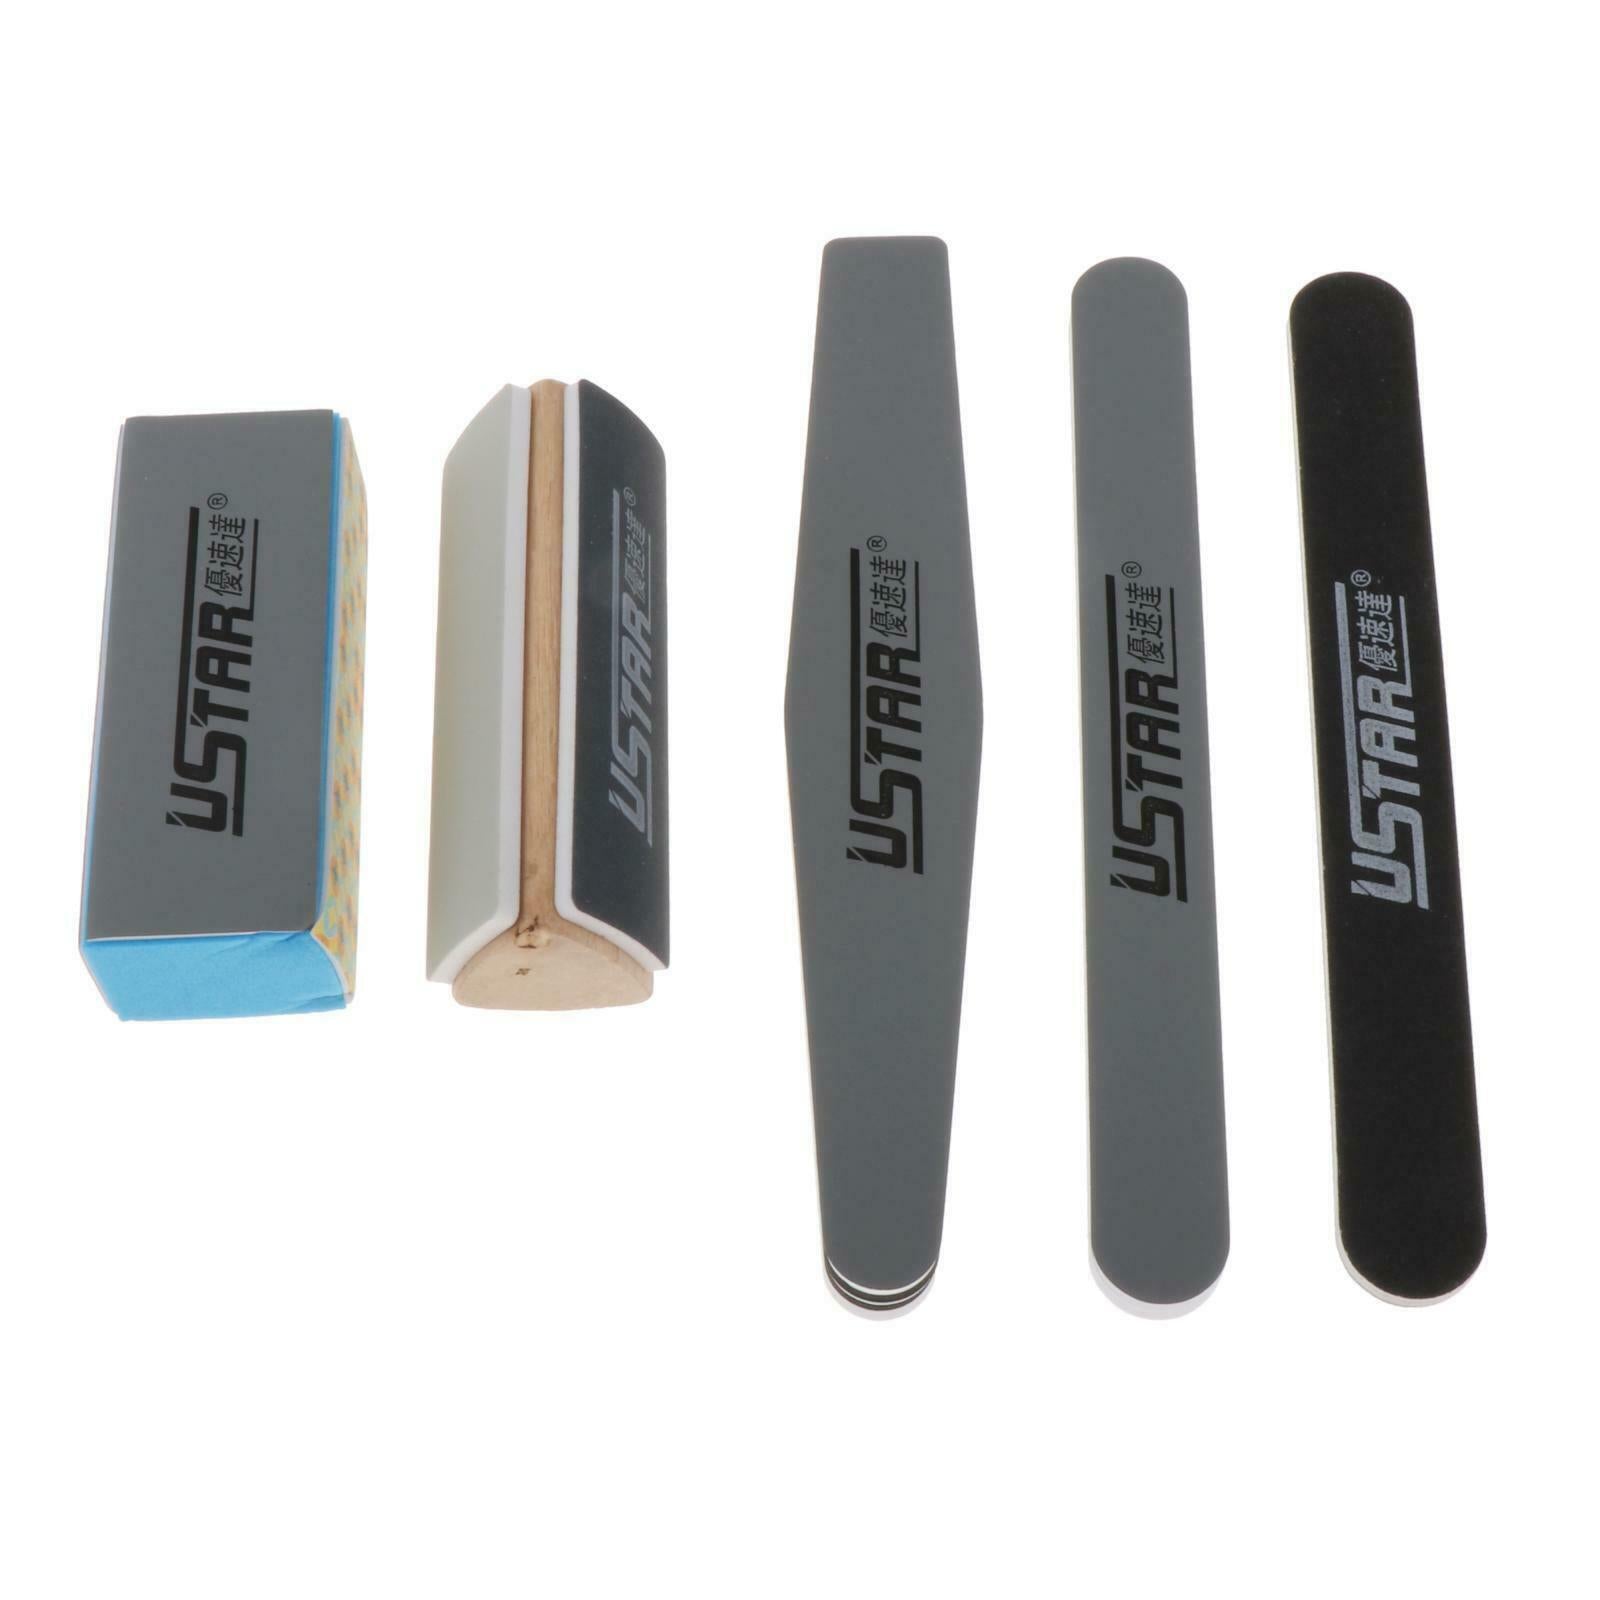 5 Shapes Double Side Nail Files Grinding Buffer Emery Board Modelling Tools